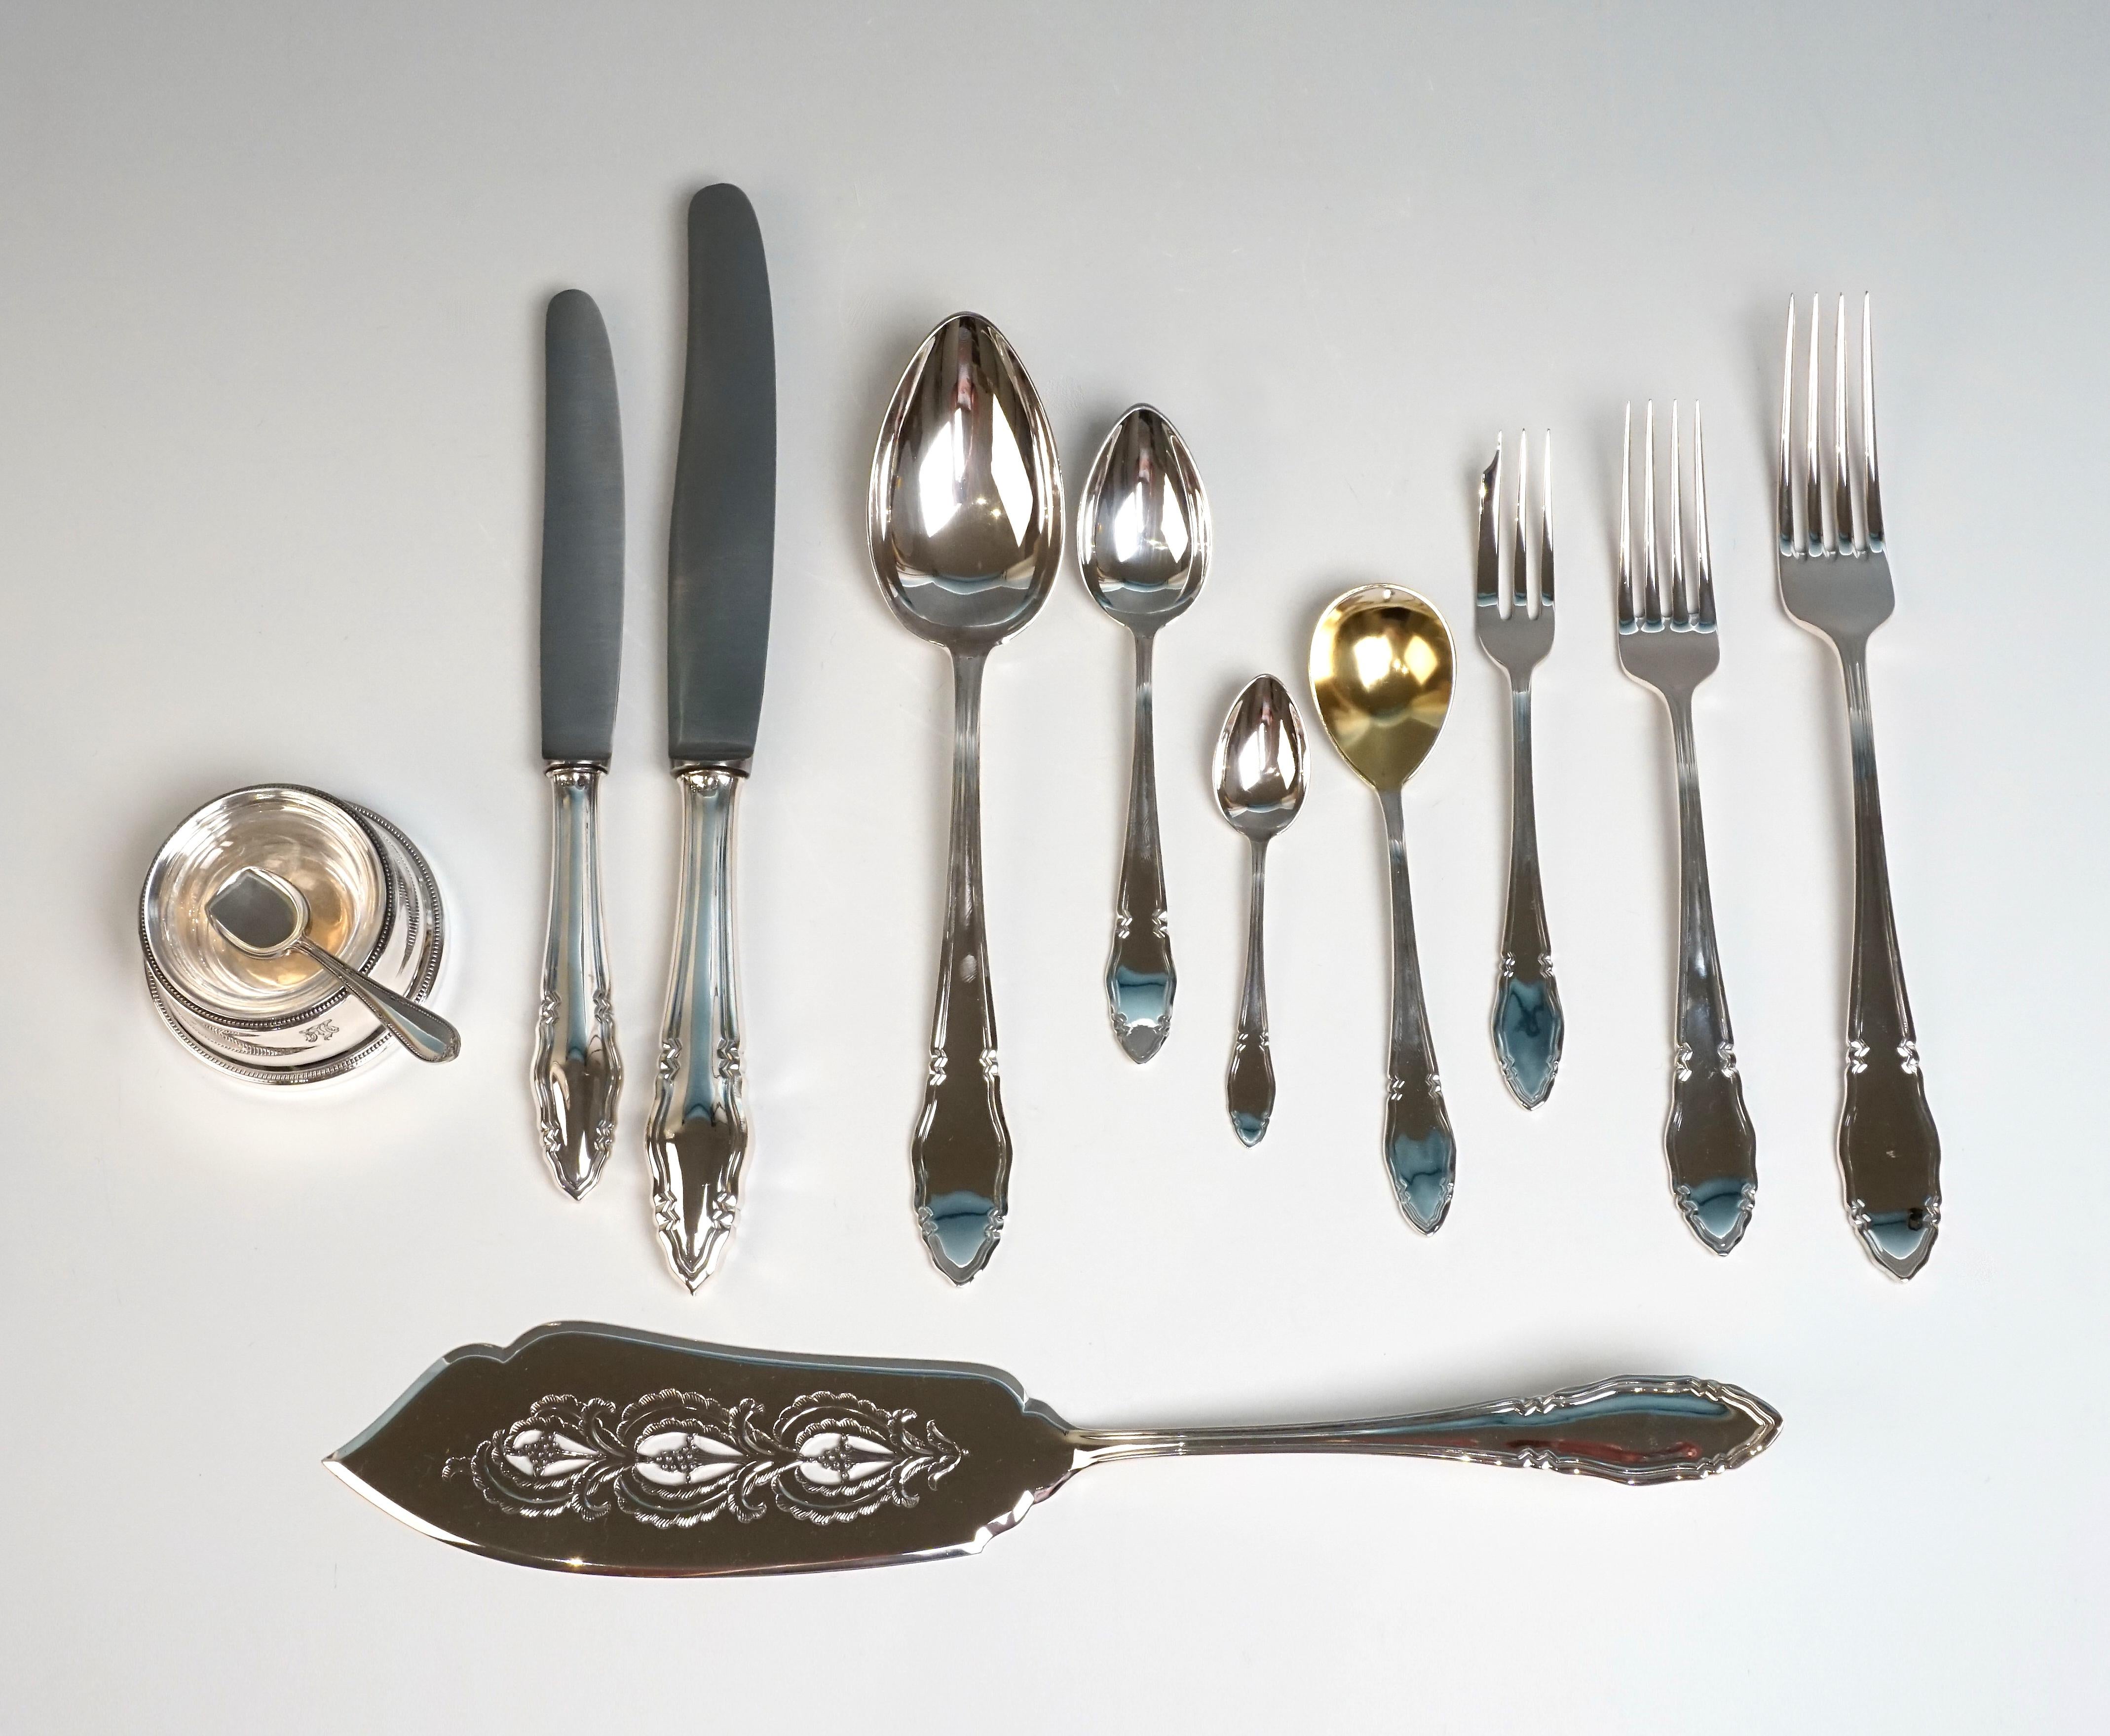 Viennese Silver Art Nouveau 121 Parts Cutlery Set for 12 People by Klinkosch  In Excellent Condition For Sale In Vienna, AT